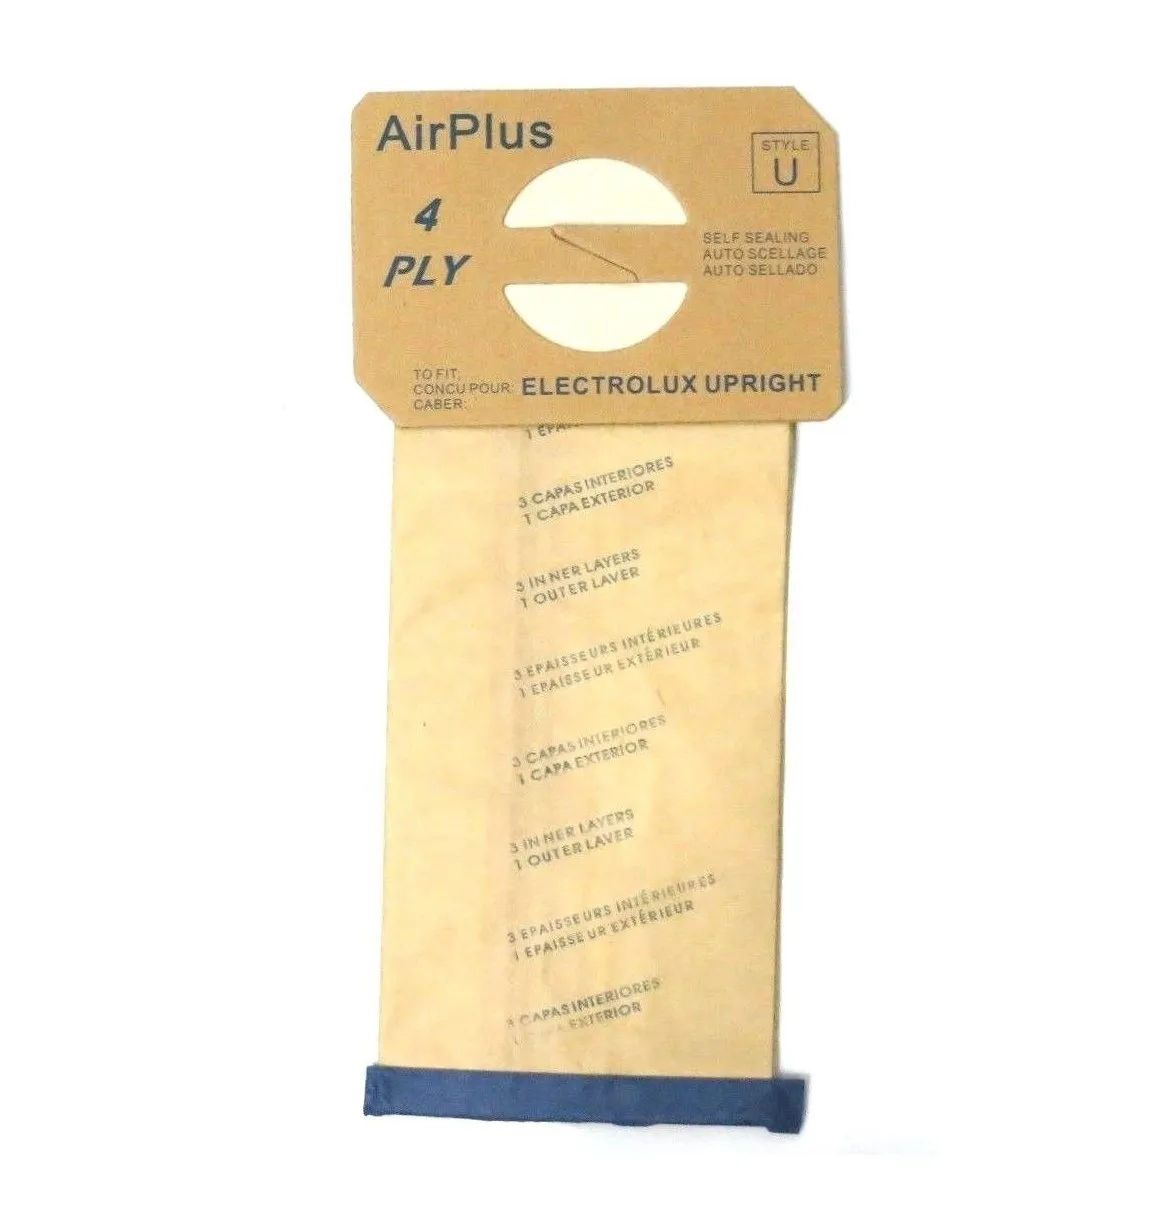 Replacement Micro Filtration Vacuum Cleaner Dust Bags Made To Fit Electrolux  Upright Style U And Proteam Prolux - Buy Fits Epic Prolux Discovery Genesis  Lux Vacuum Cleaners Fits All Electrolux Uprights Made